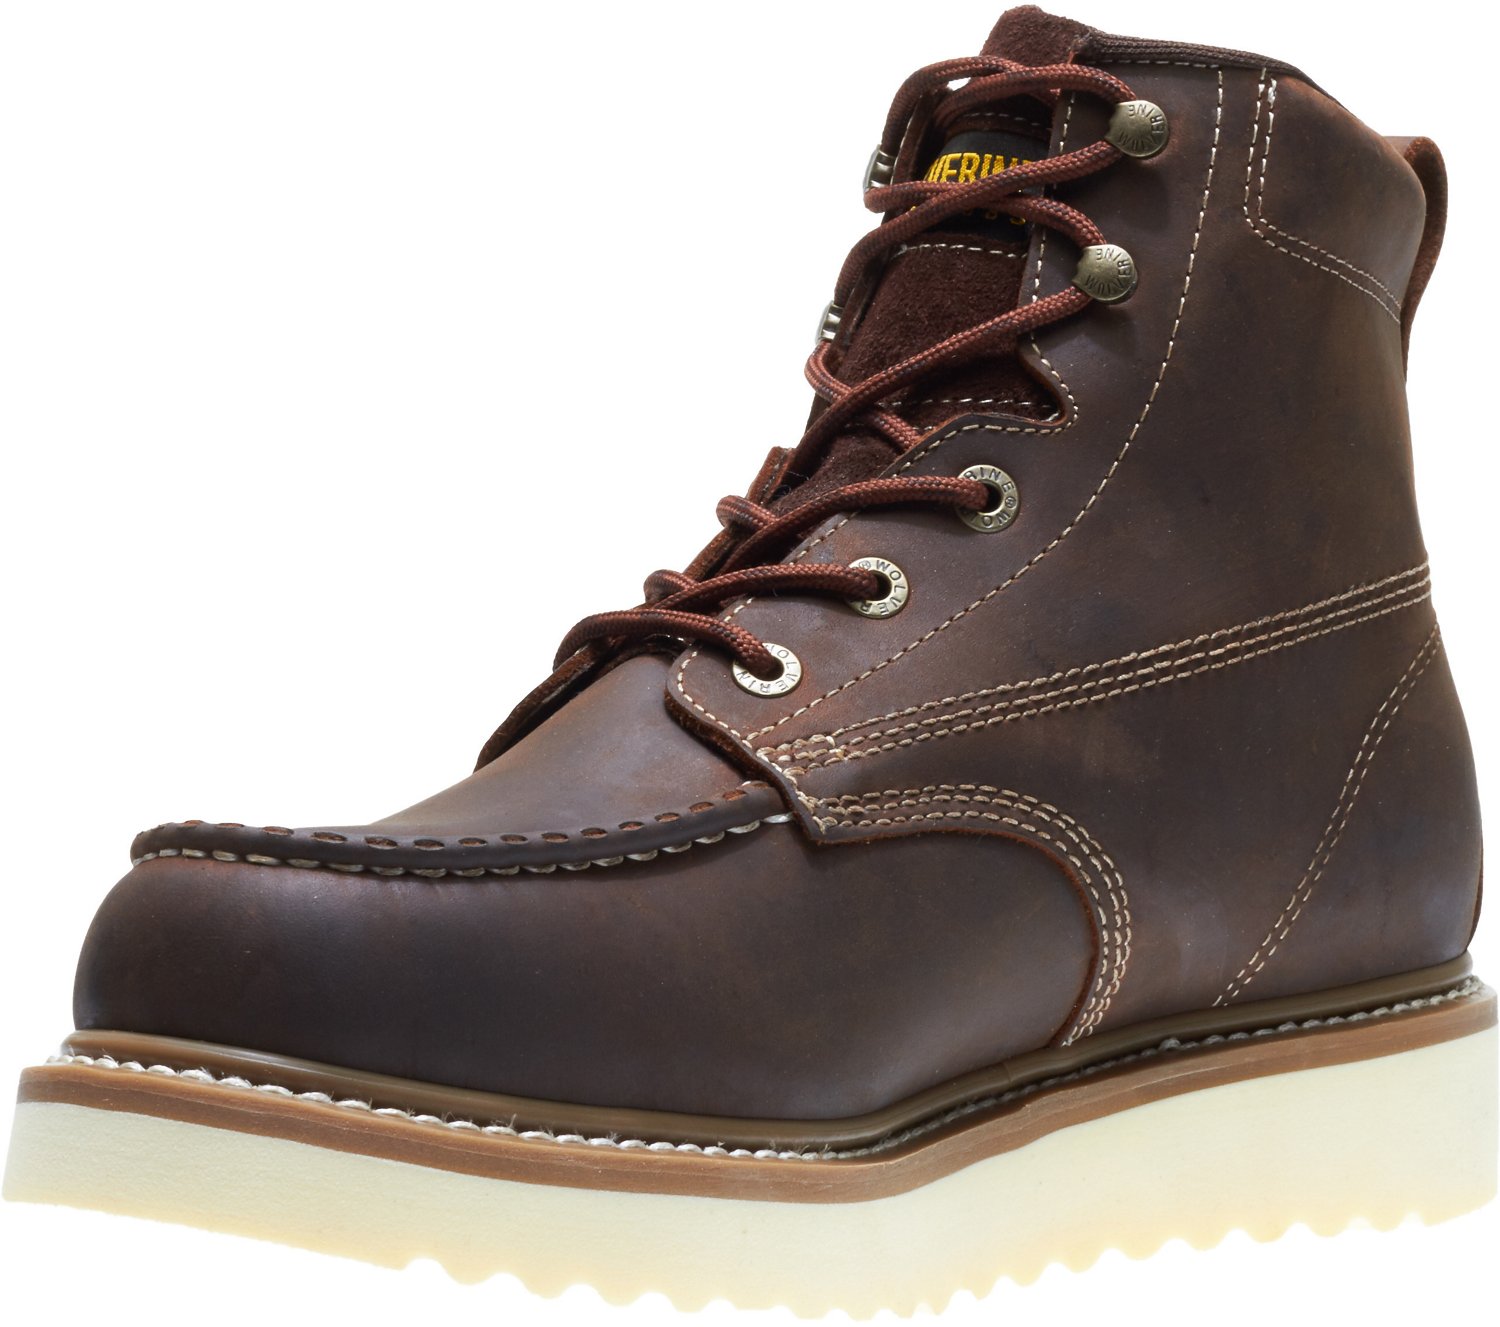 Wolverine Men's Loader 6 in Wedge EH Lace Up Work Boots | Academy